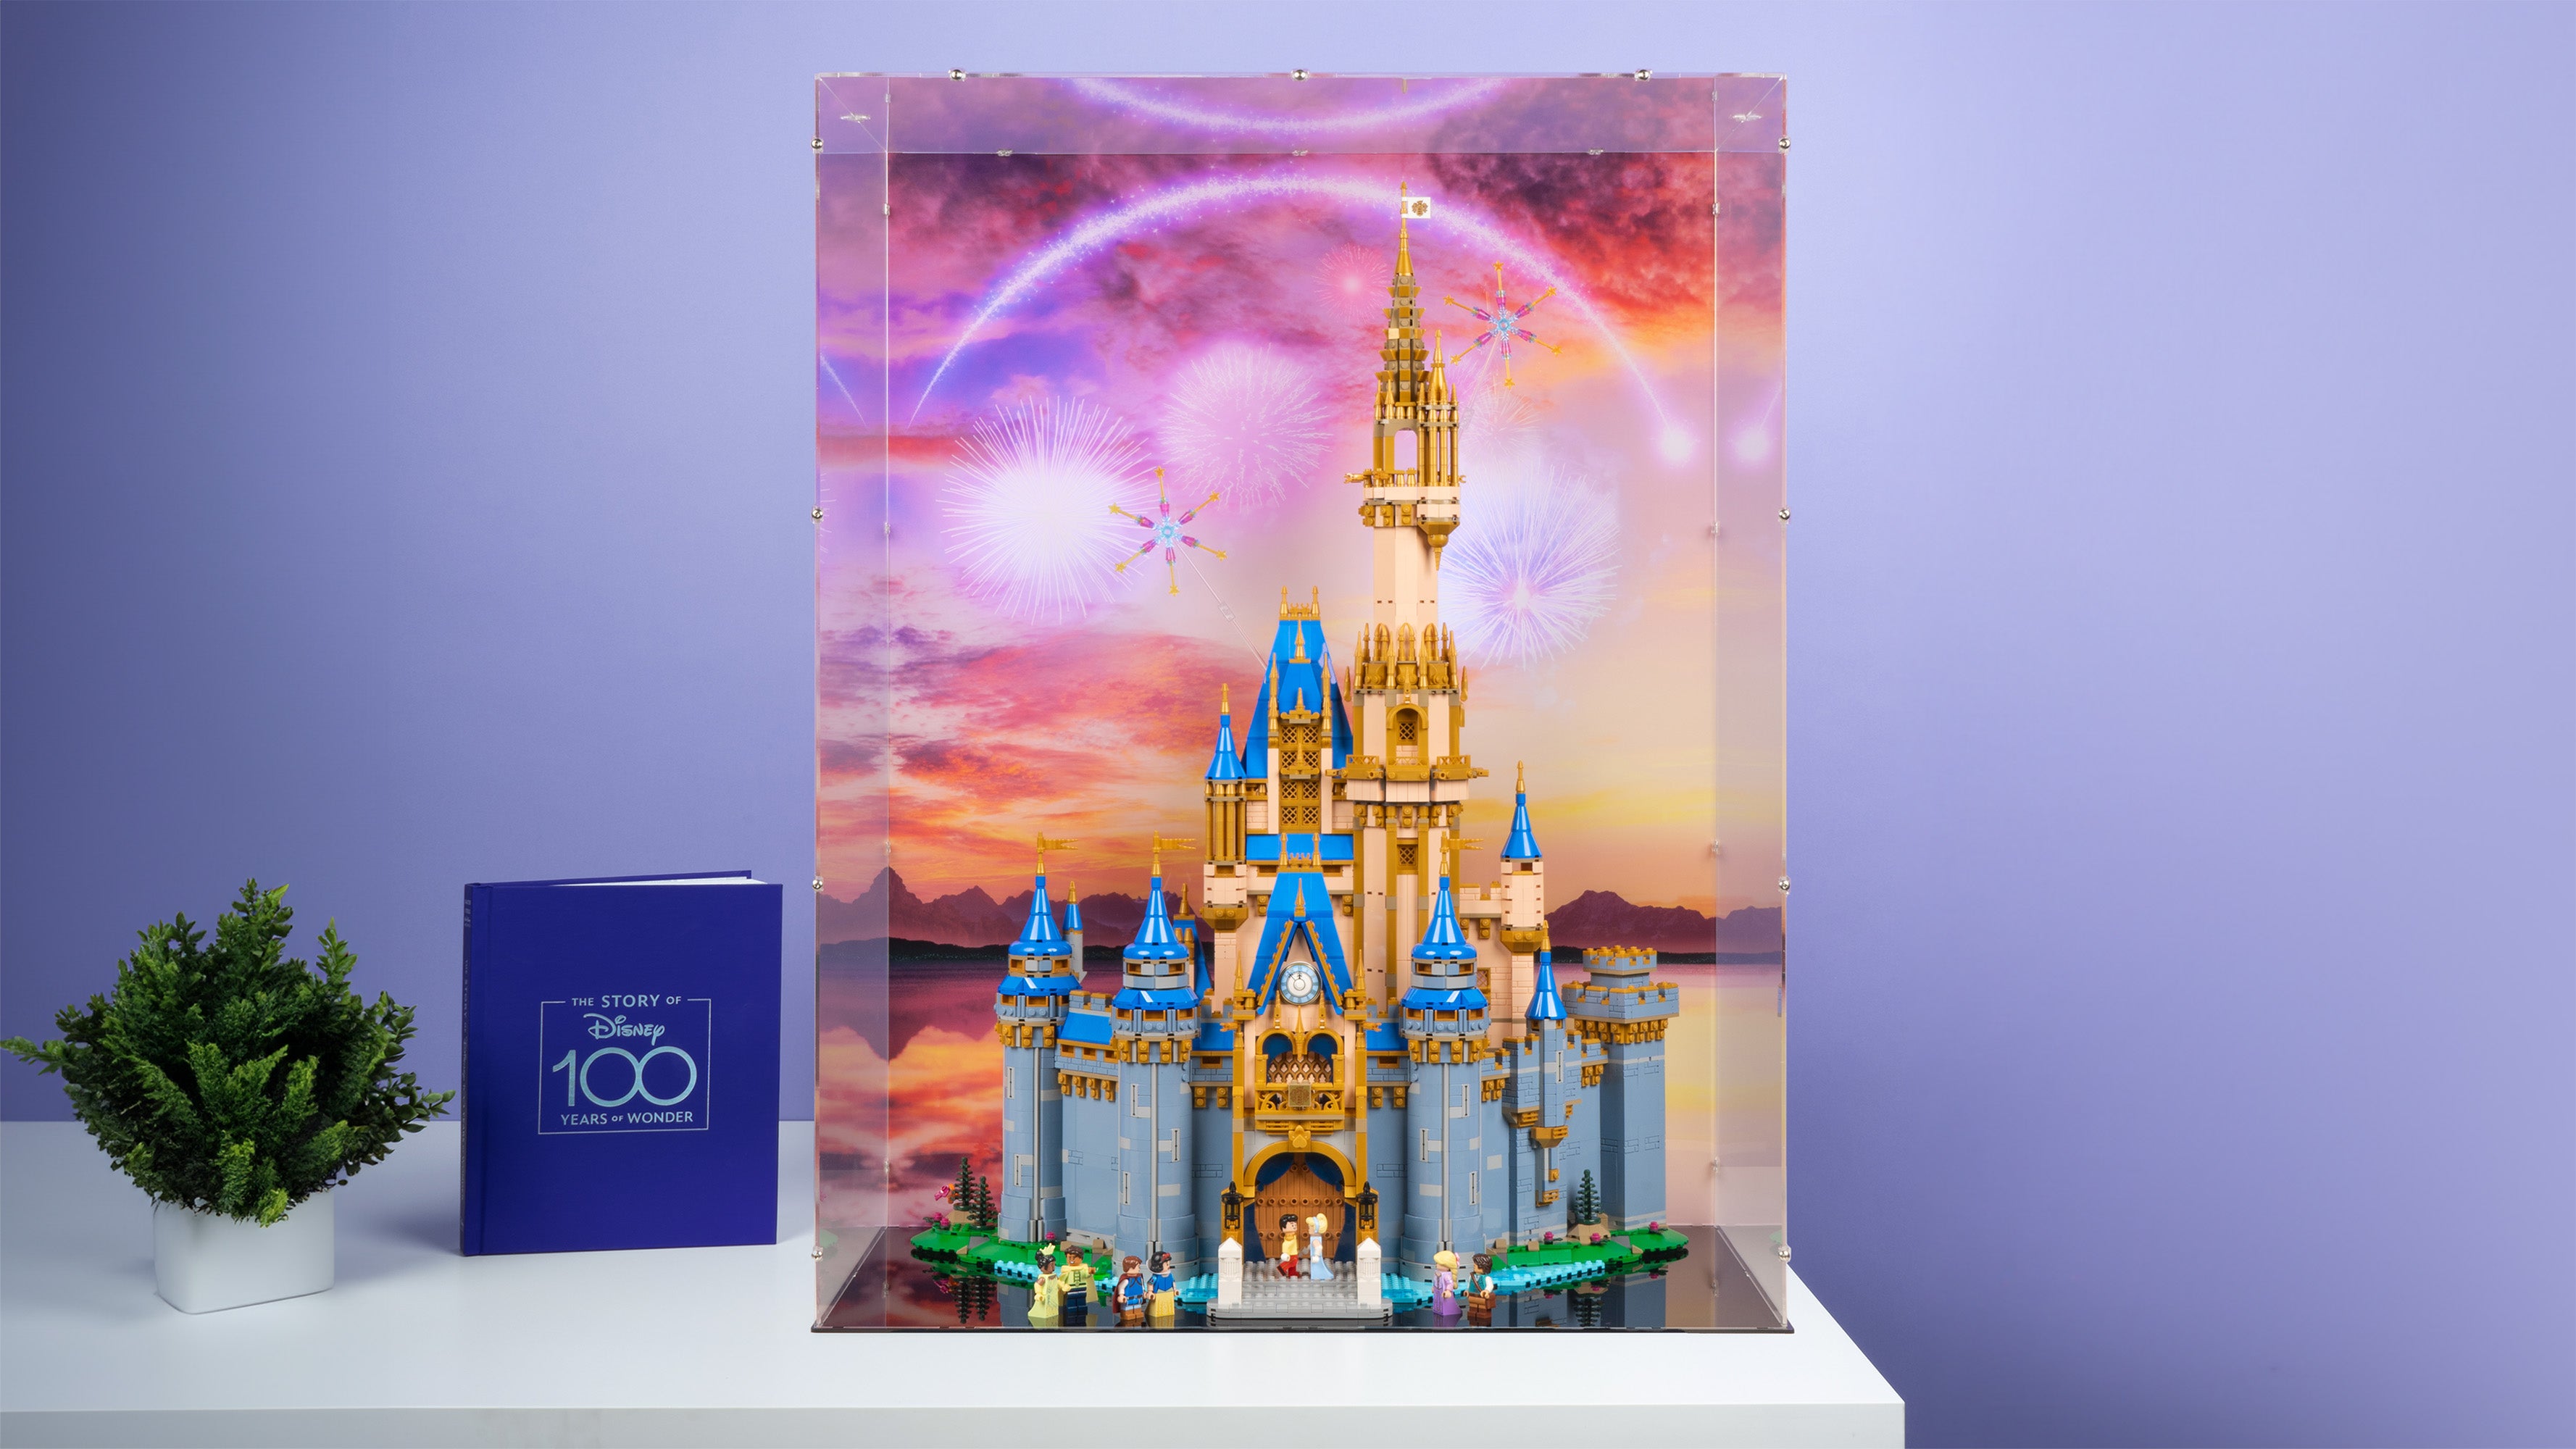 LEGO 43222 Disney Castle Display Case with a UV printed background.